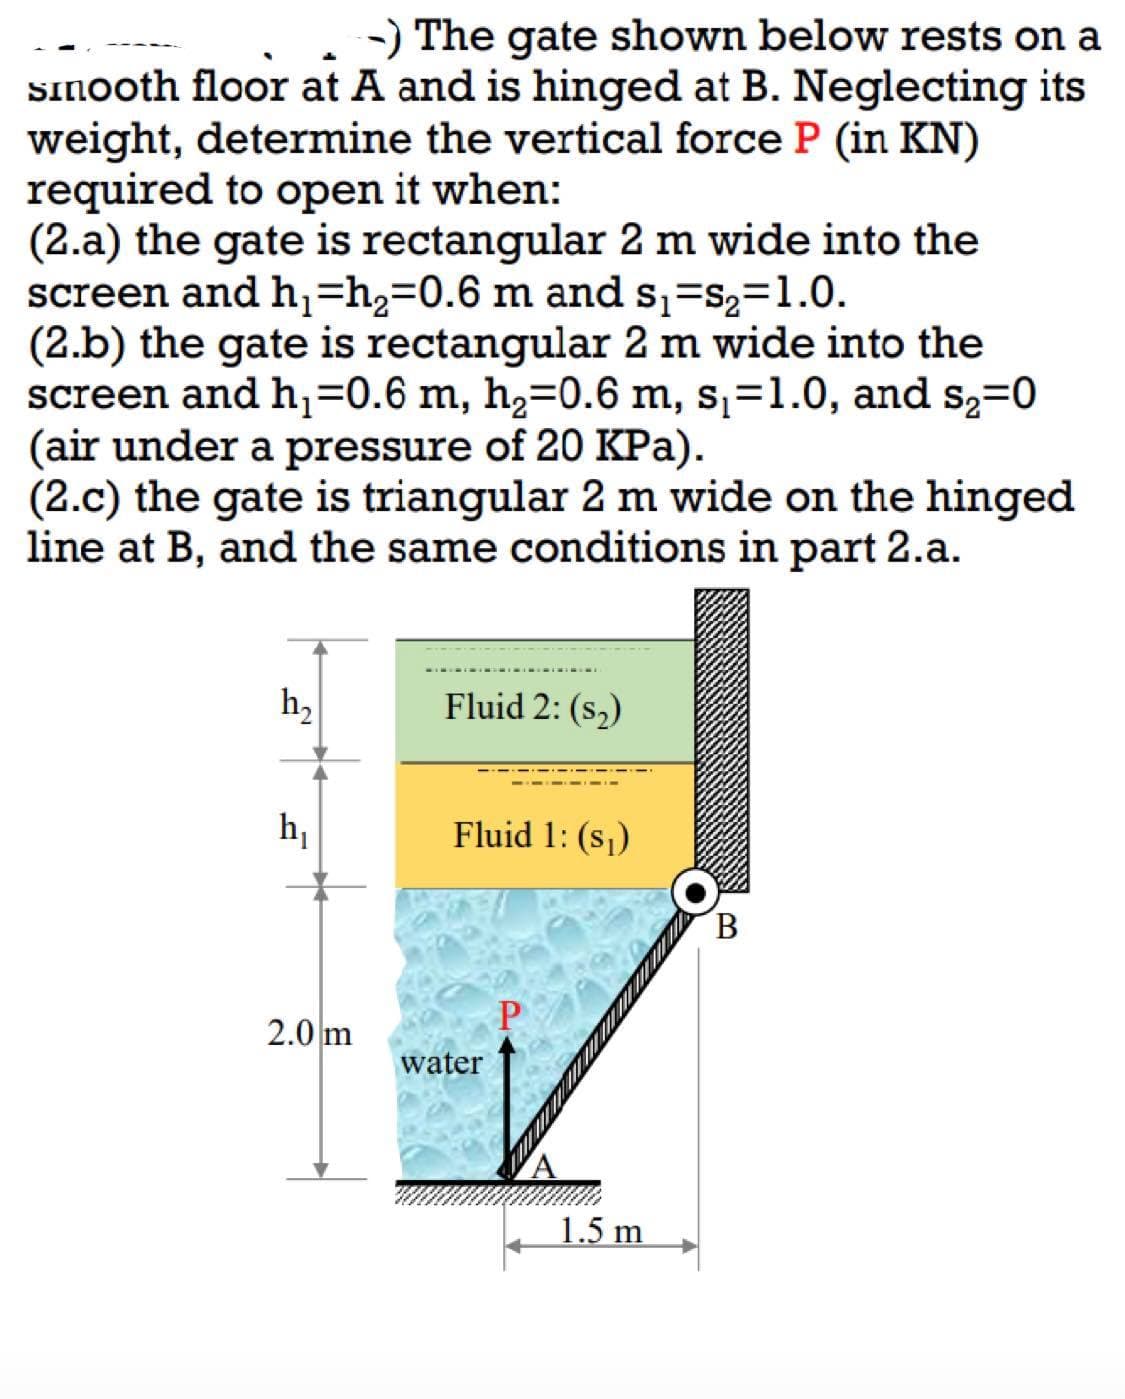 -) The gate shown below rests on a
smooth floor at A and is hinged at B. Neglecting its
weight, determine the vertical force P (in KN)
required to open it when:
(2.a) the gate is rectangular 2 m wide into the
screen and h₁=h₂=0.6 m and s₁ s₂=1.0.
(2.b) the gate is rectangular 2 m wide into the
screen and h₁=0.6 m, h₂=0.6 m, s₁=1.0, and s₂=0
(air under a pressure of 20 KPa).
(2.c) the gate is triangular 2 m wide on the hinged
line at B, and the same conditions in part 2.a.
h₂
Fluid 2: (S₂)
h₁
Fluid 1: (S₁)
2.0 m
water
1.5 m
B